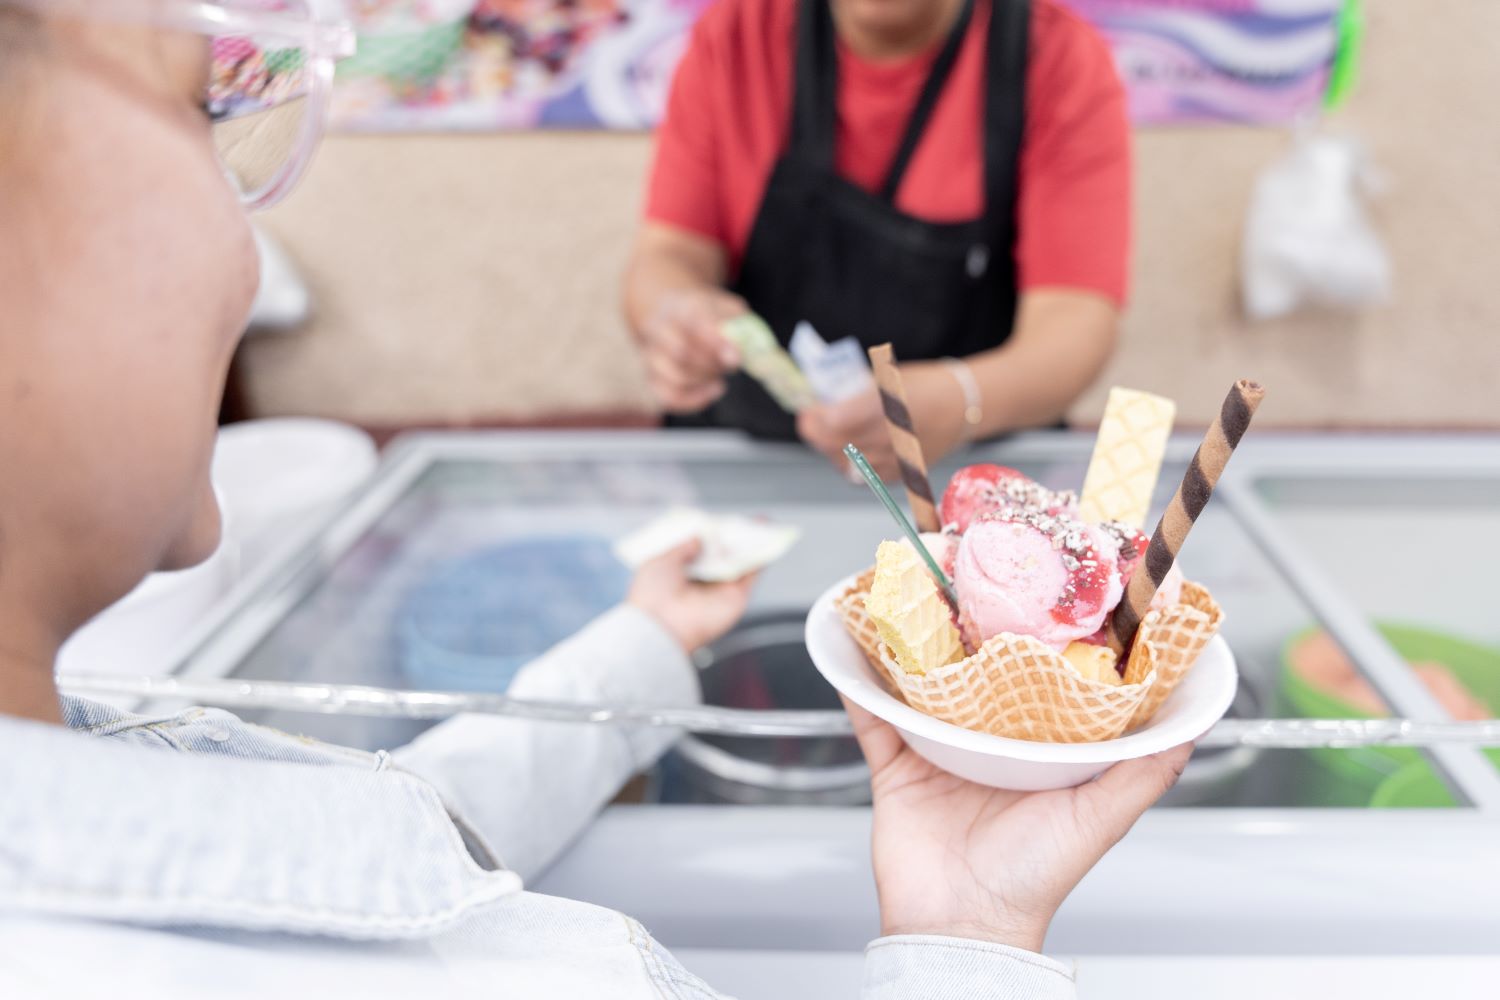 "Chill Out" With These Local Ice Cream Shops in Salem, Oregon